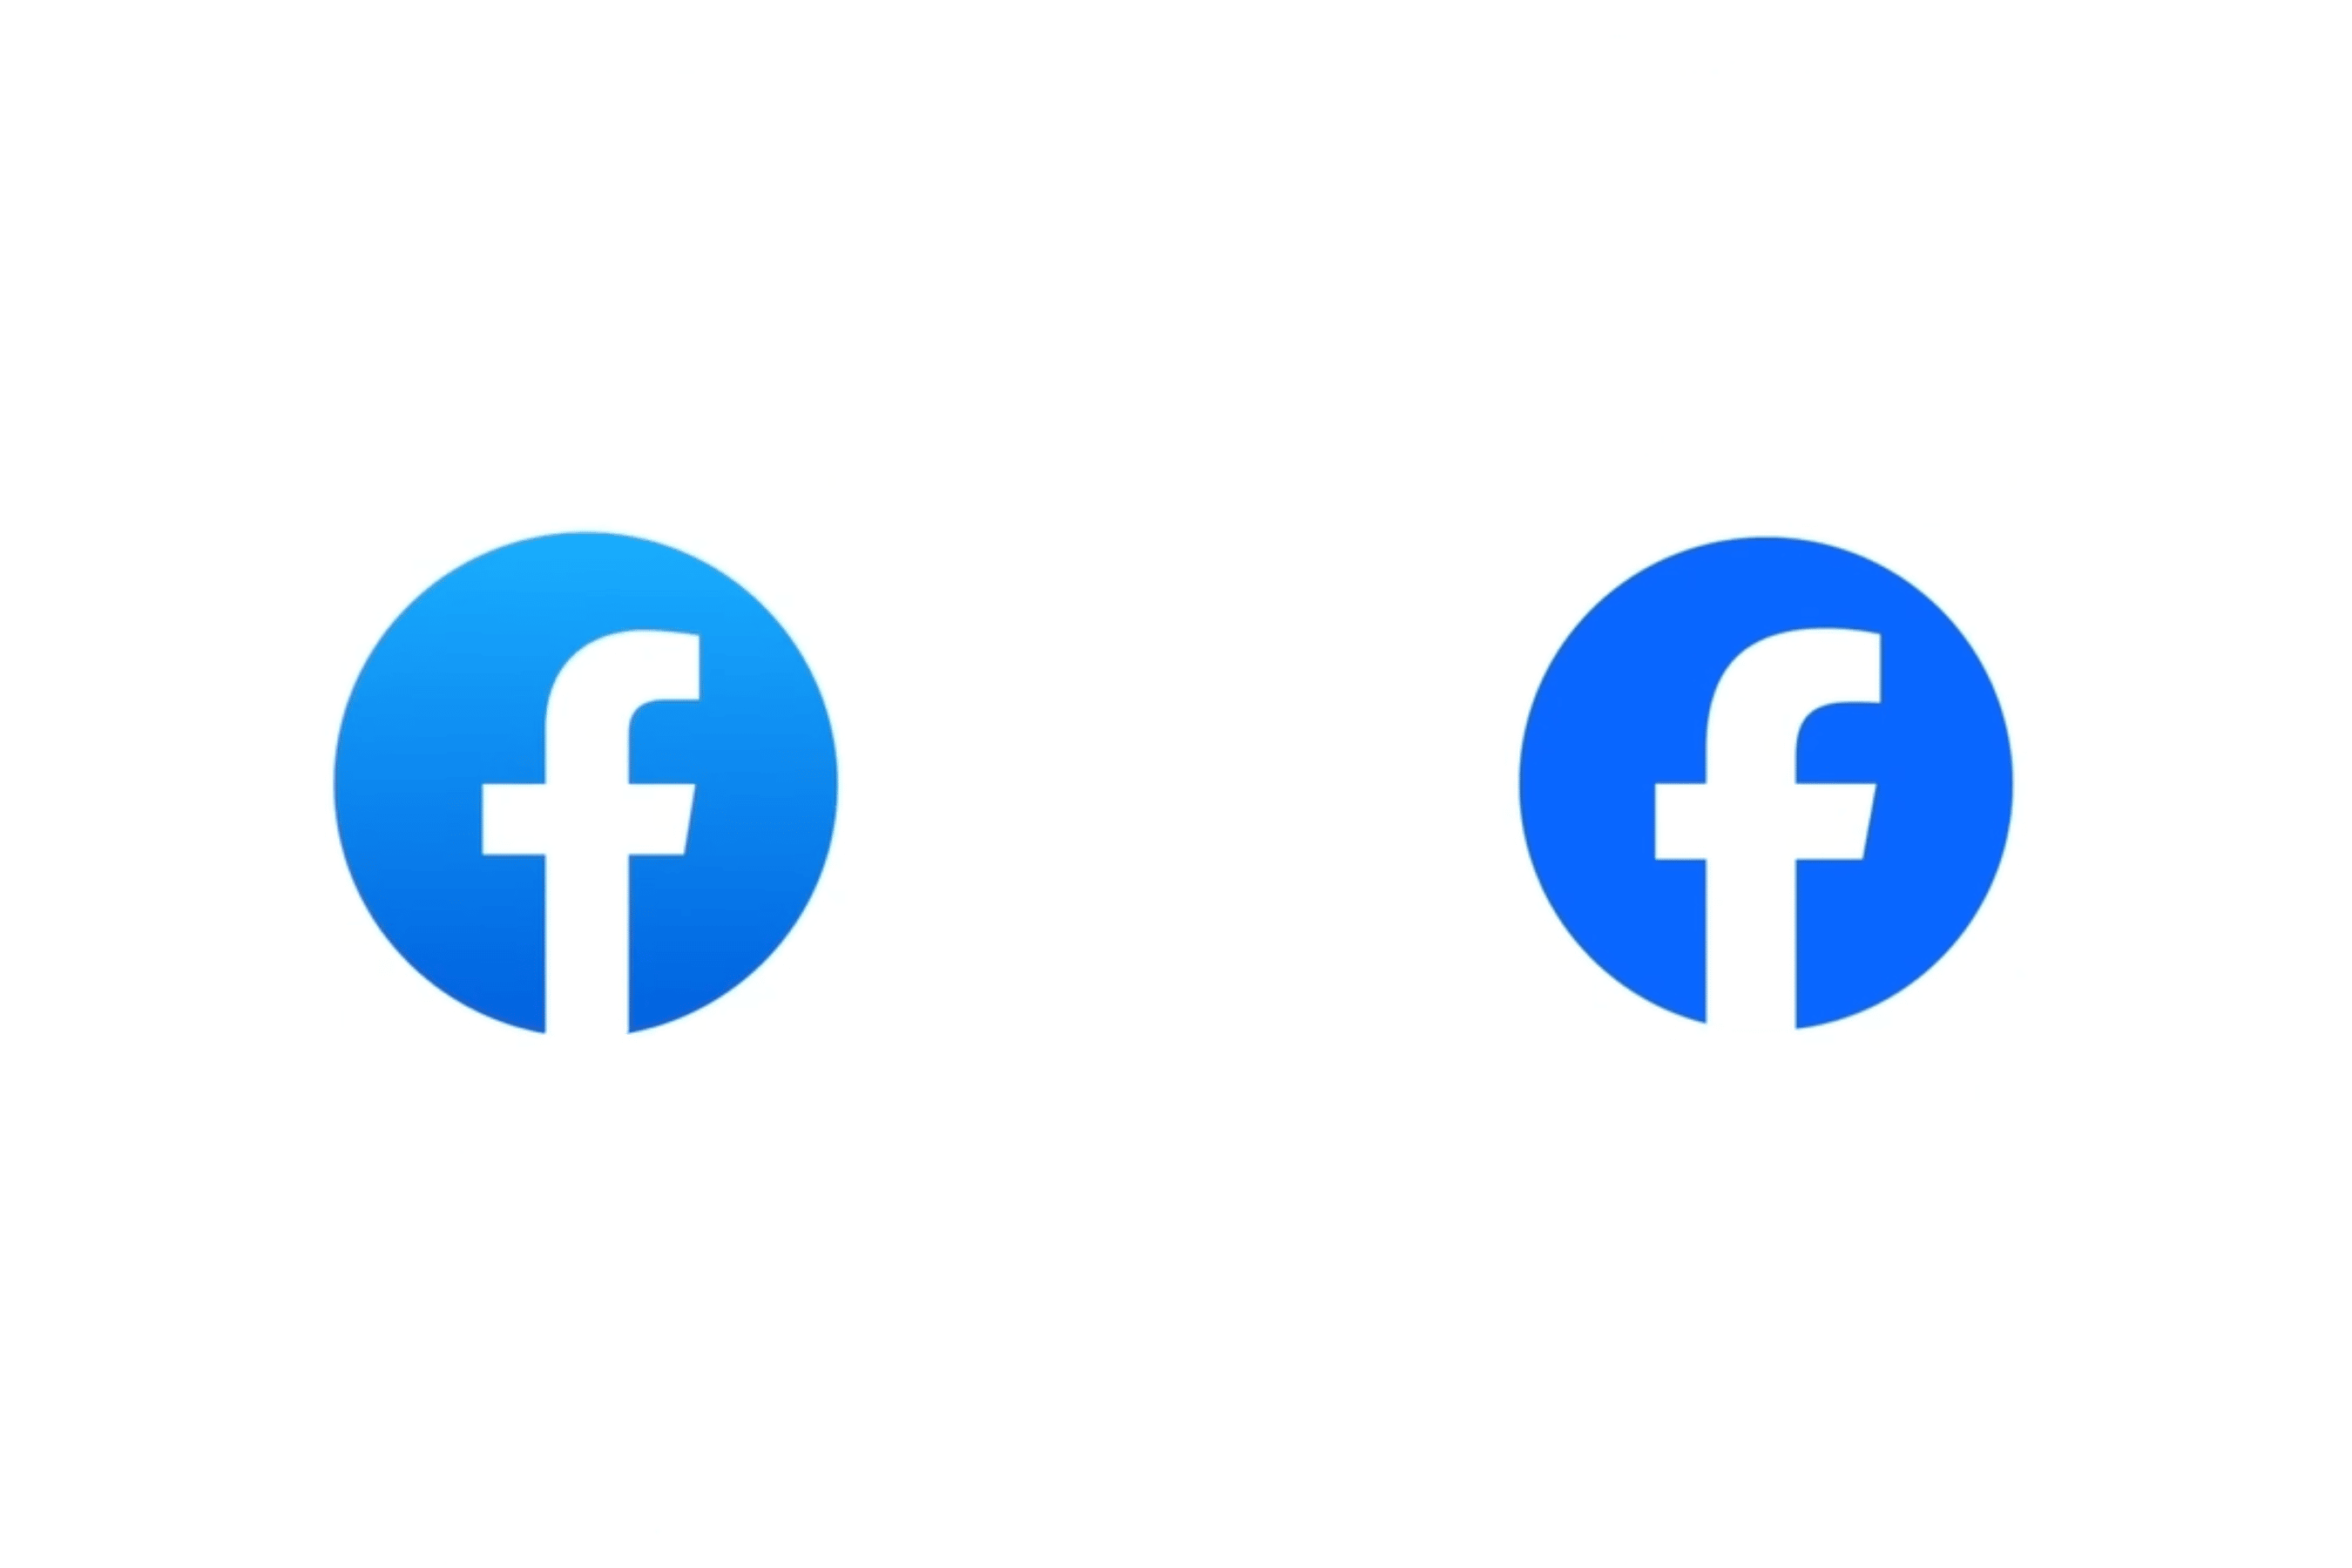 The old Facebook logo, left, with the new logo on the right. 